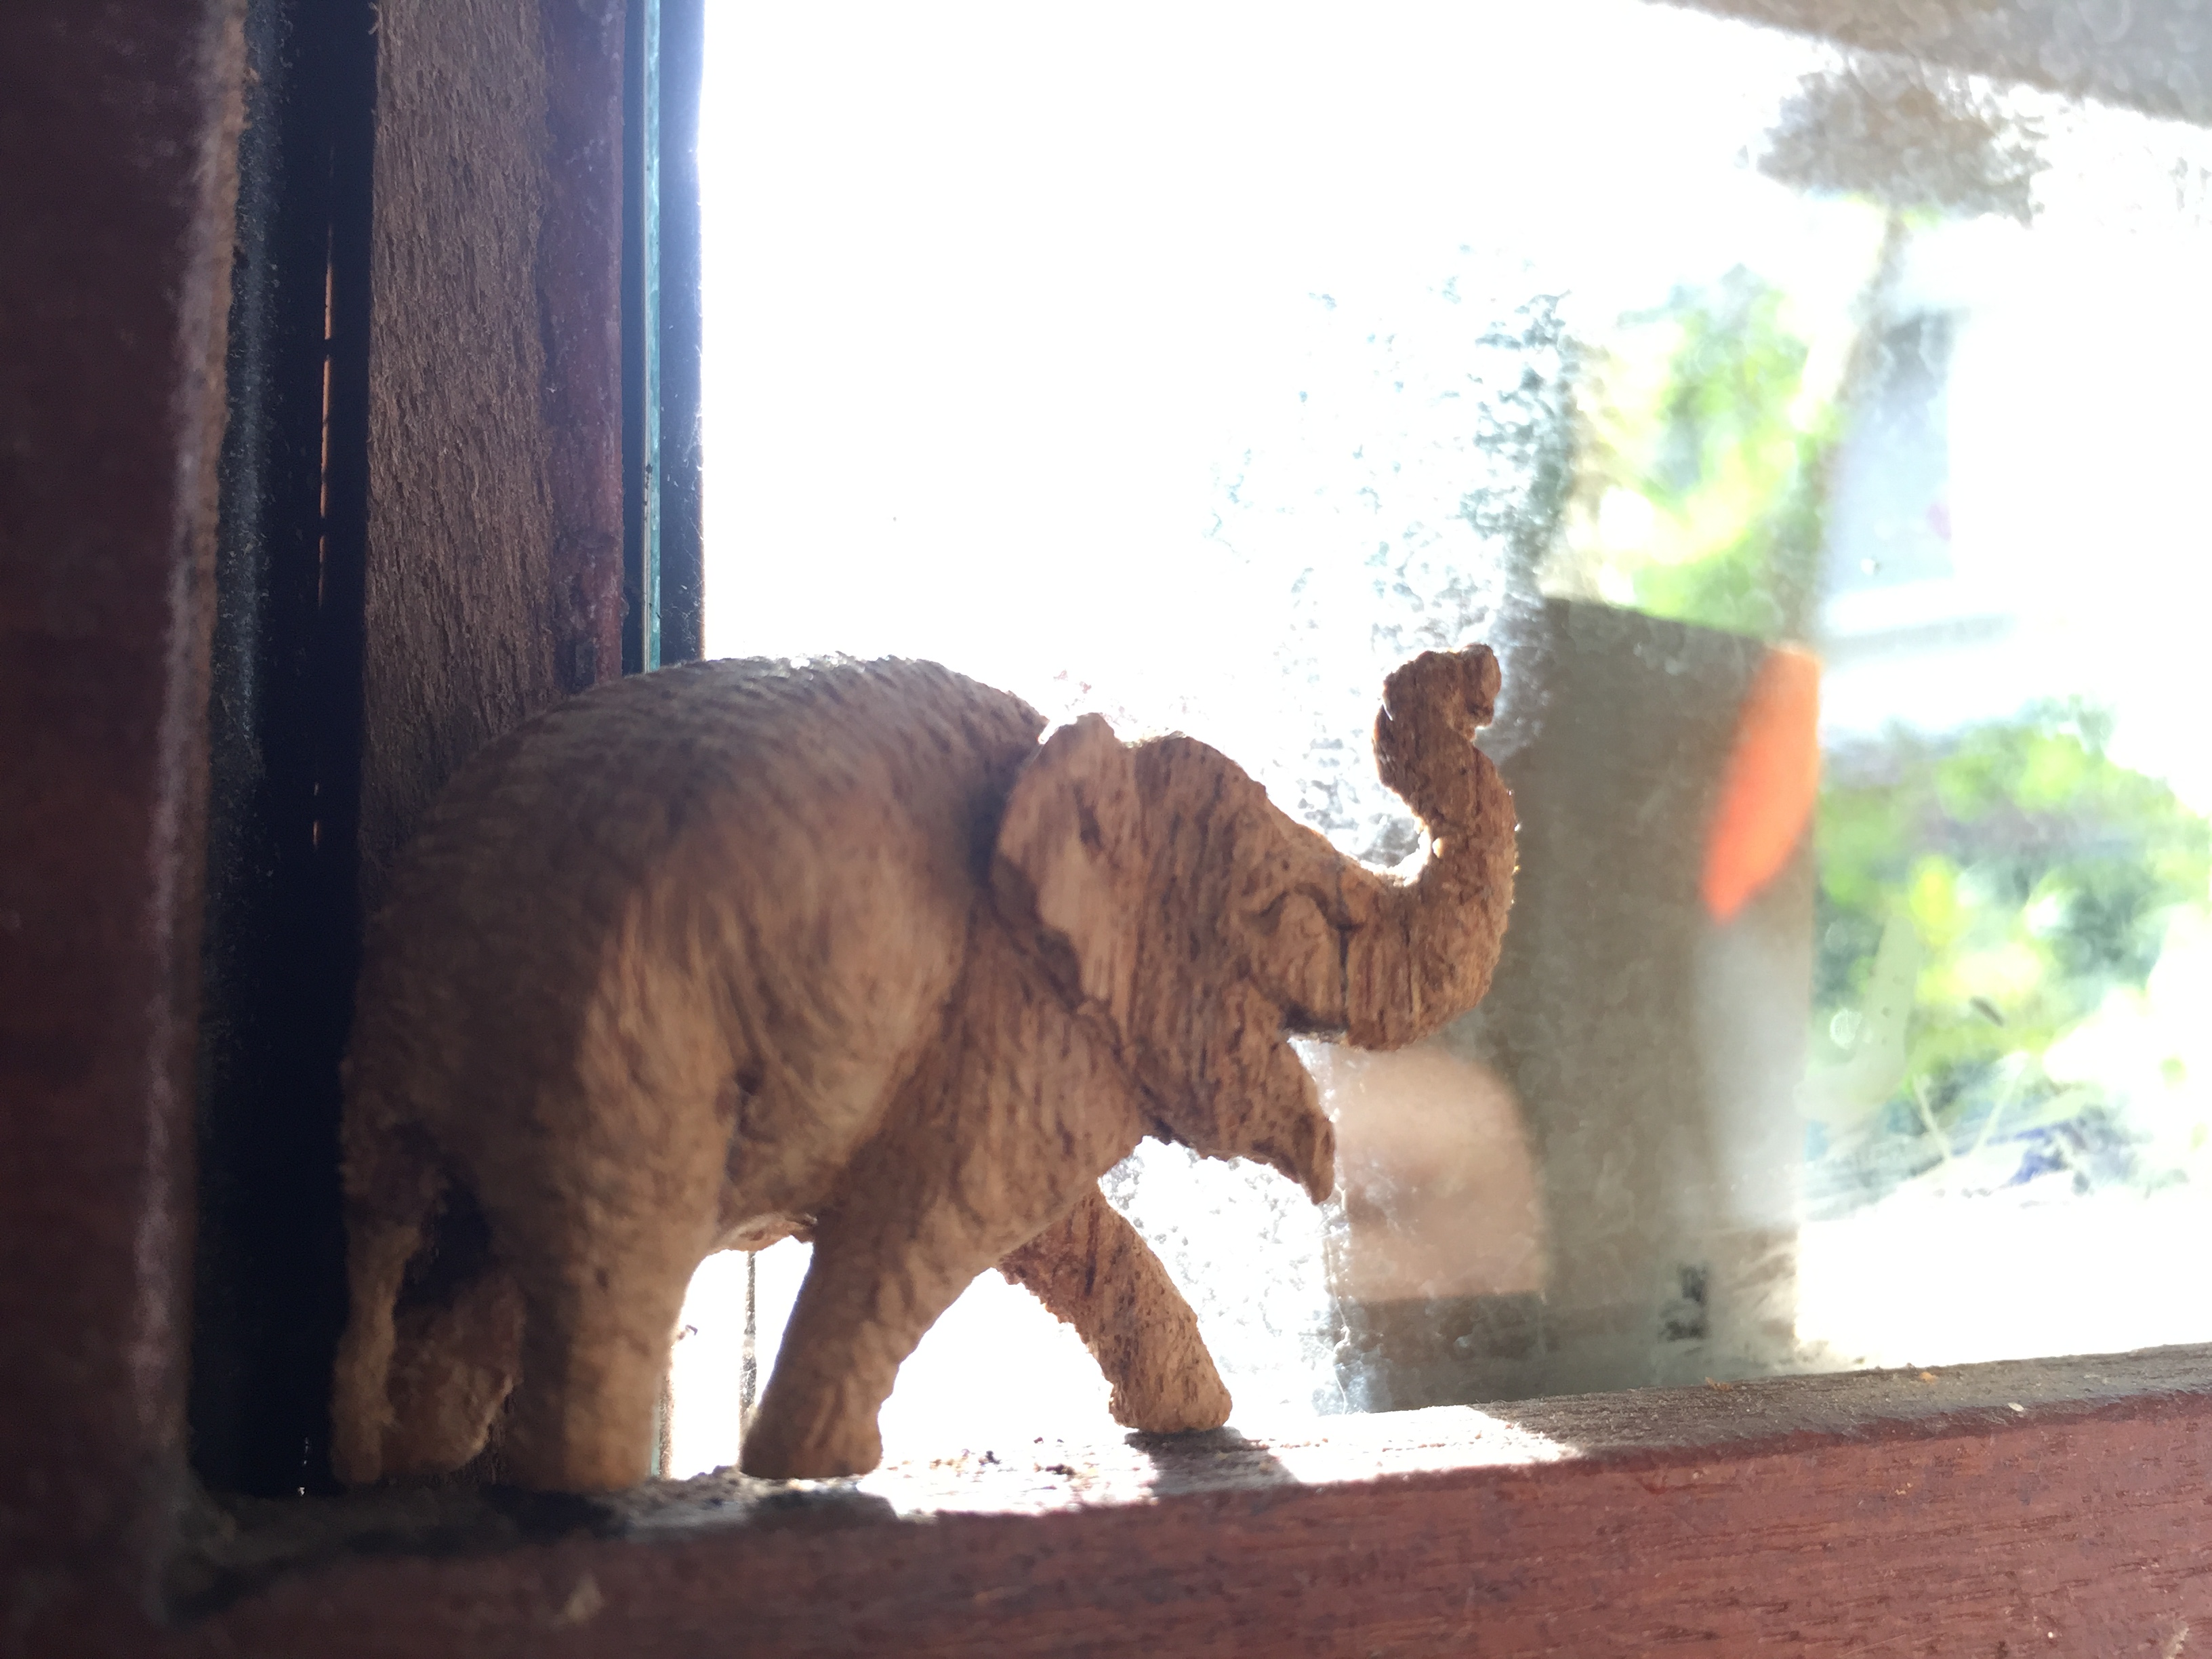 Wood carving - Tiny elephent